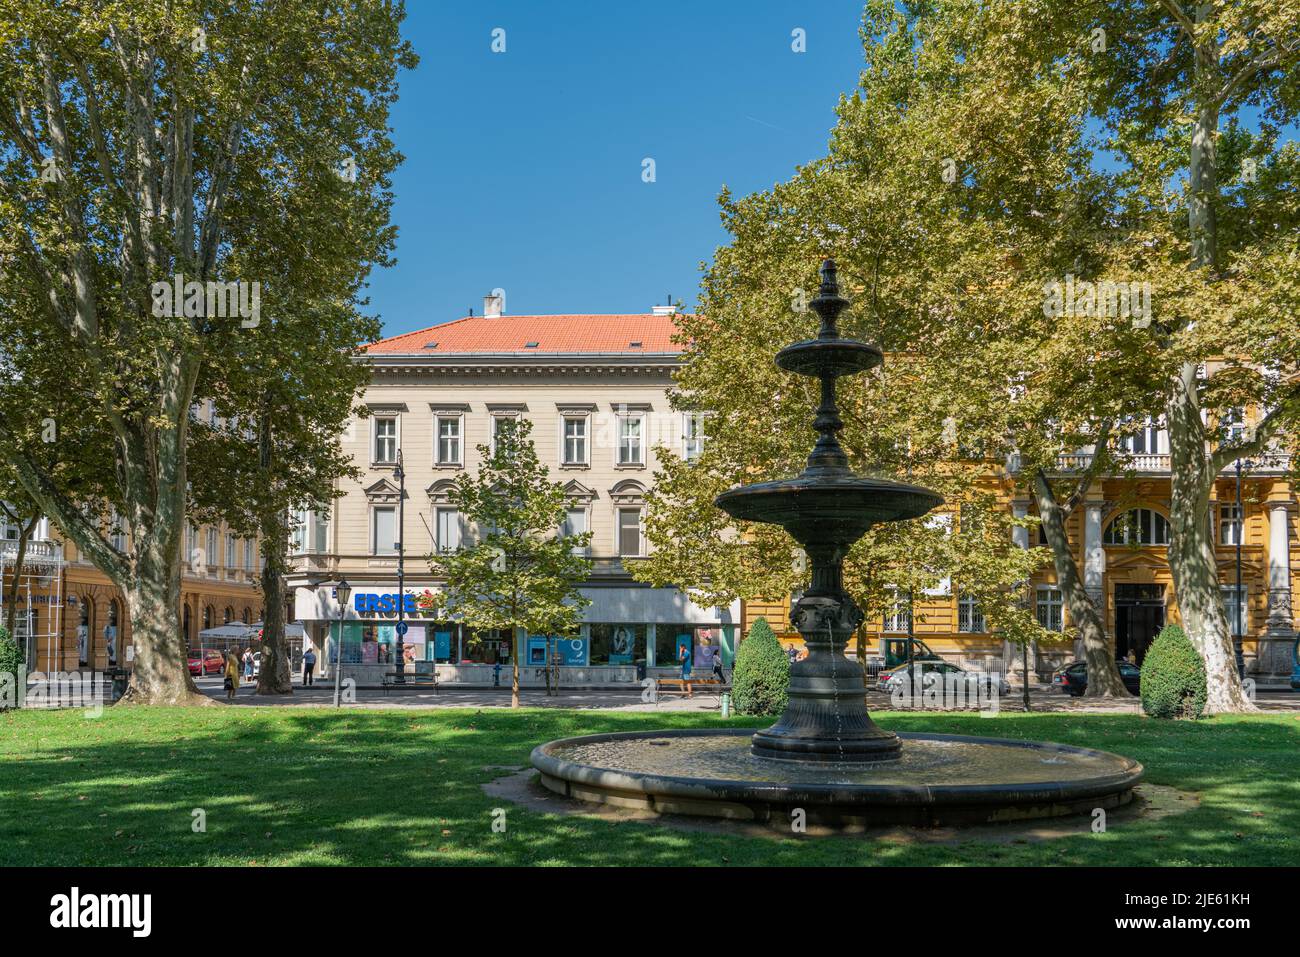 ZAGREB, CROATIA - JULY 29, 2021: People Relaxing On Summer Day In Zagreb Central Park Stock Photo